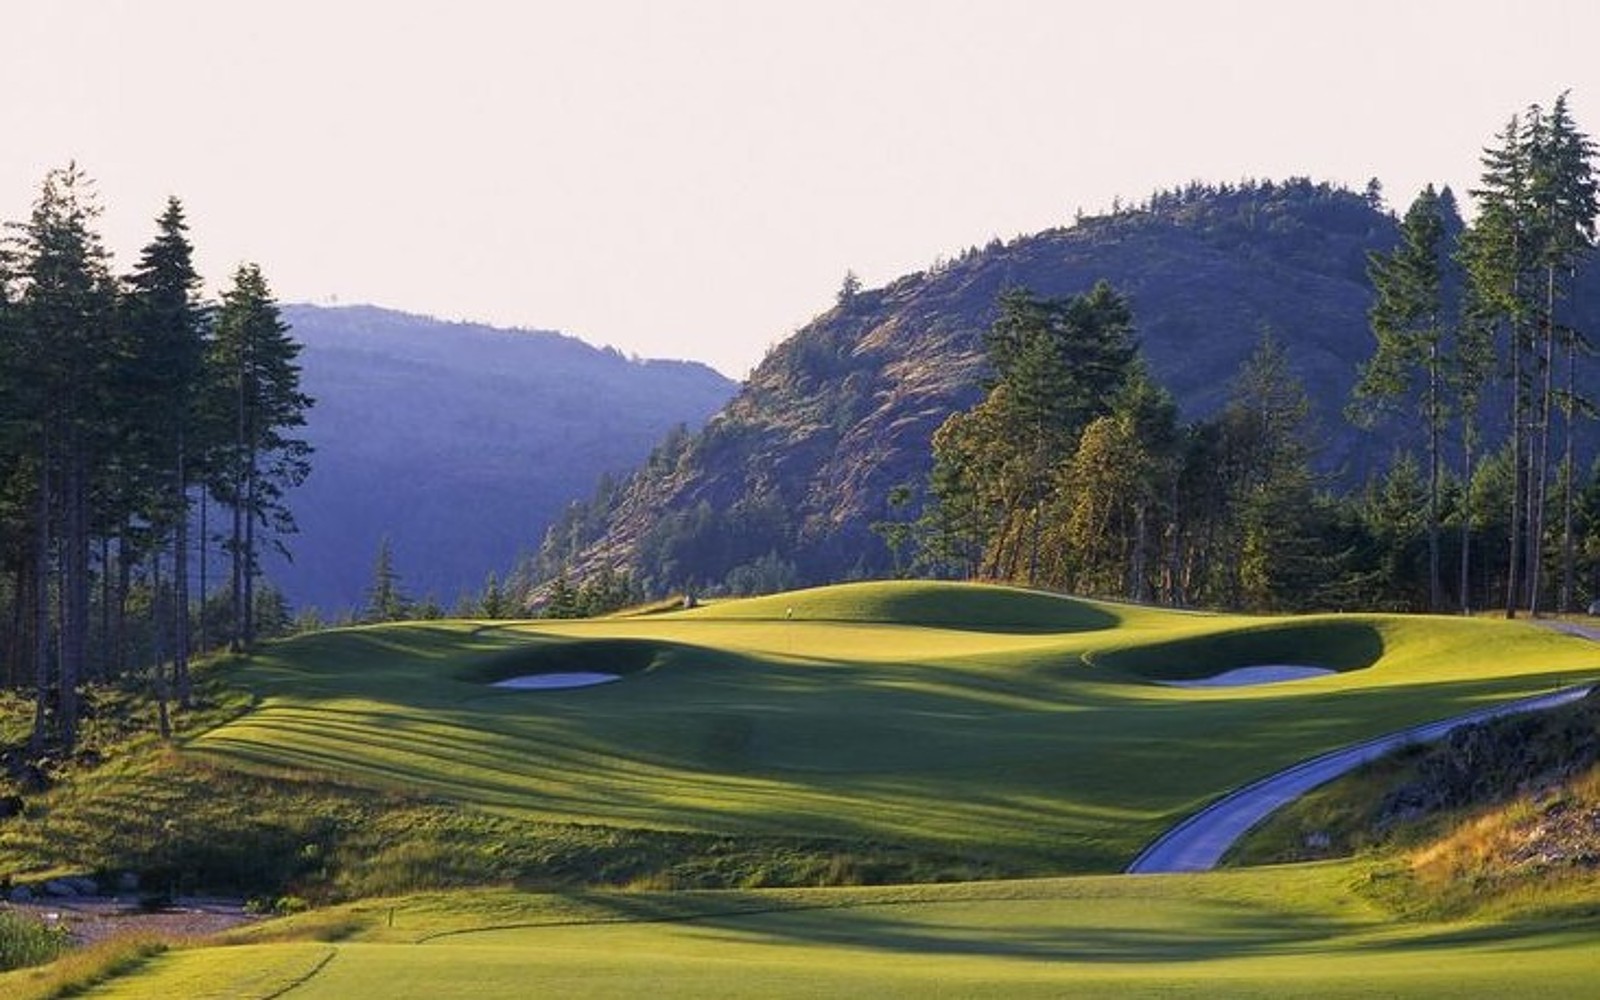 The golf course at Bear Mountain Resort, Victoria BC